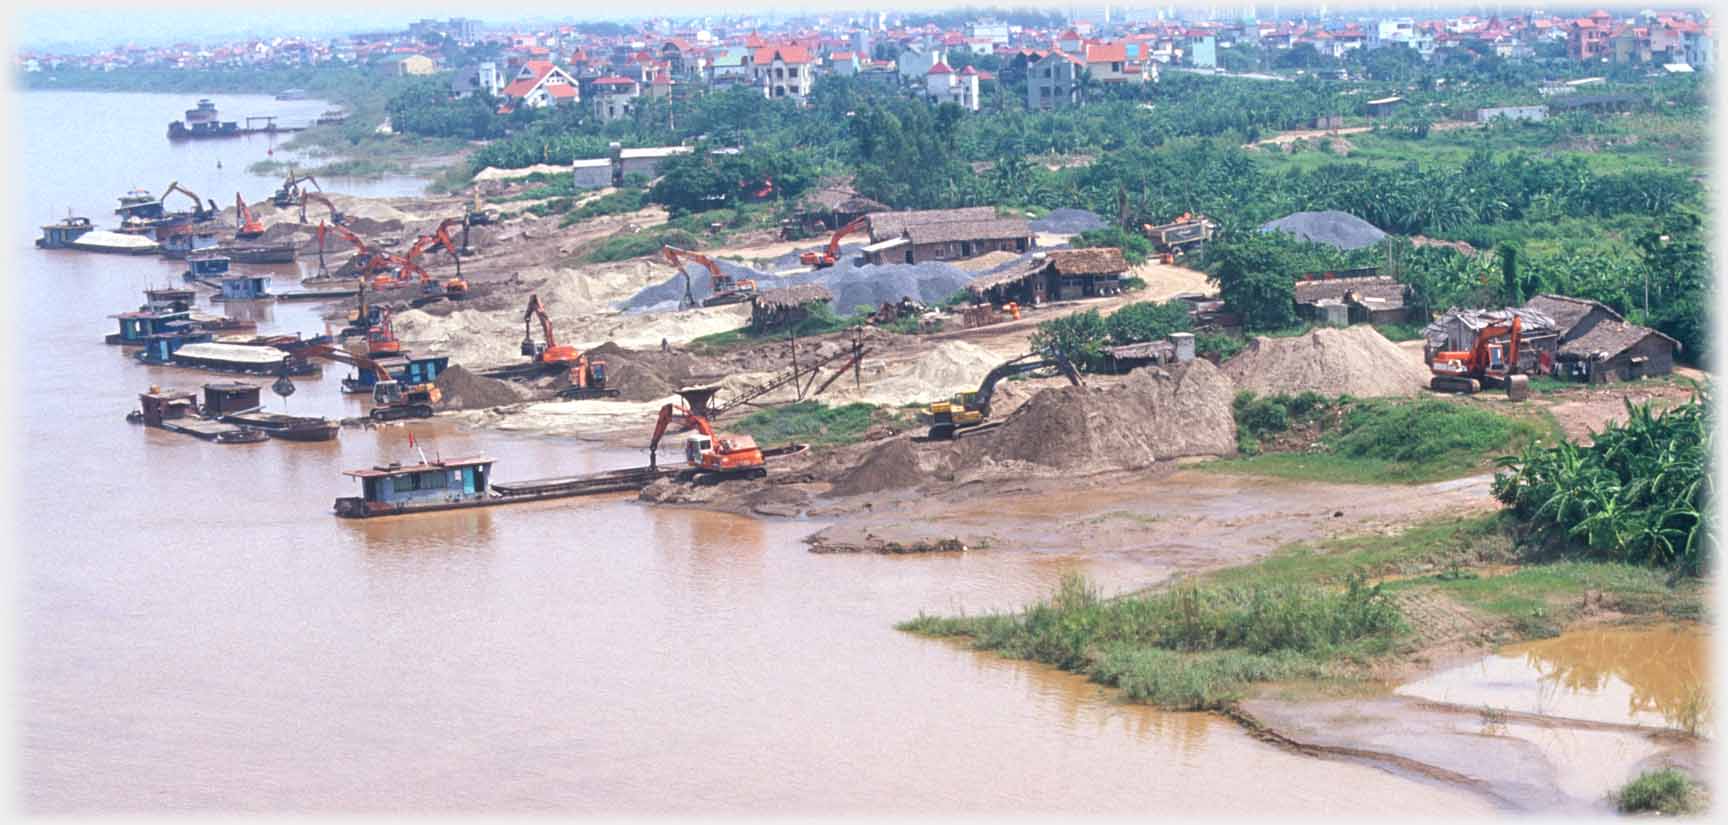 Diggers unloading silt from barges at river bank.